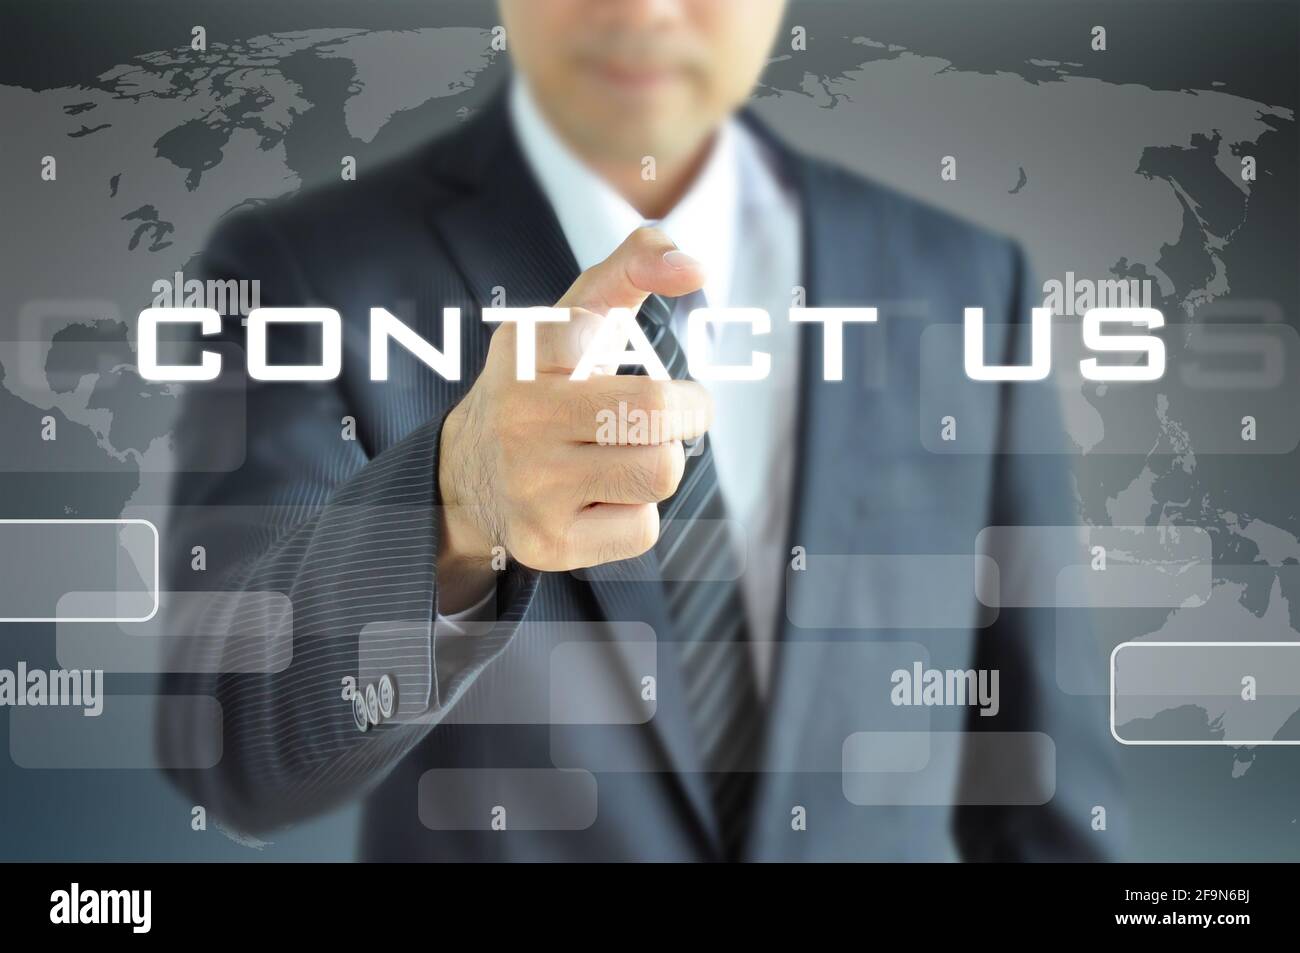 Businessman pointing to CONTACT US sign on virtual screen Stock Photo